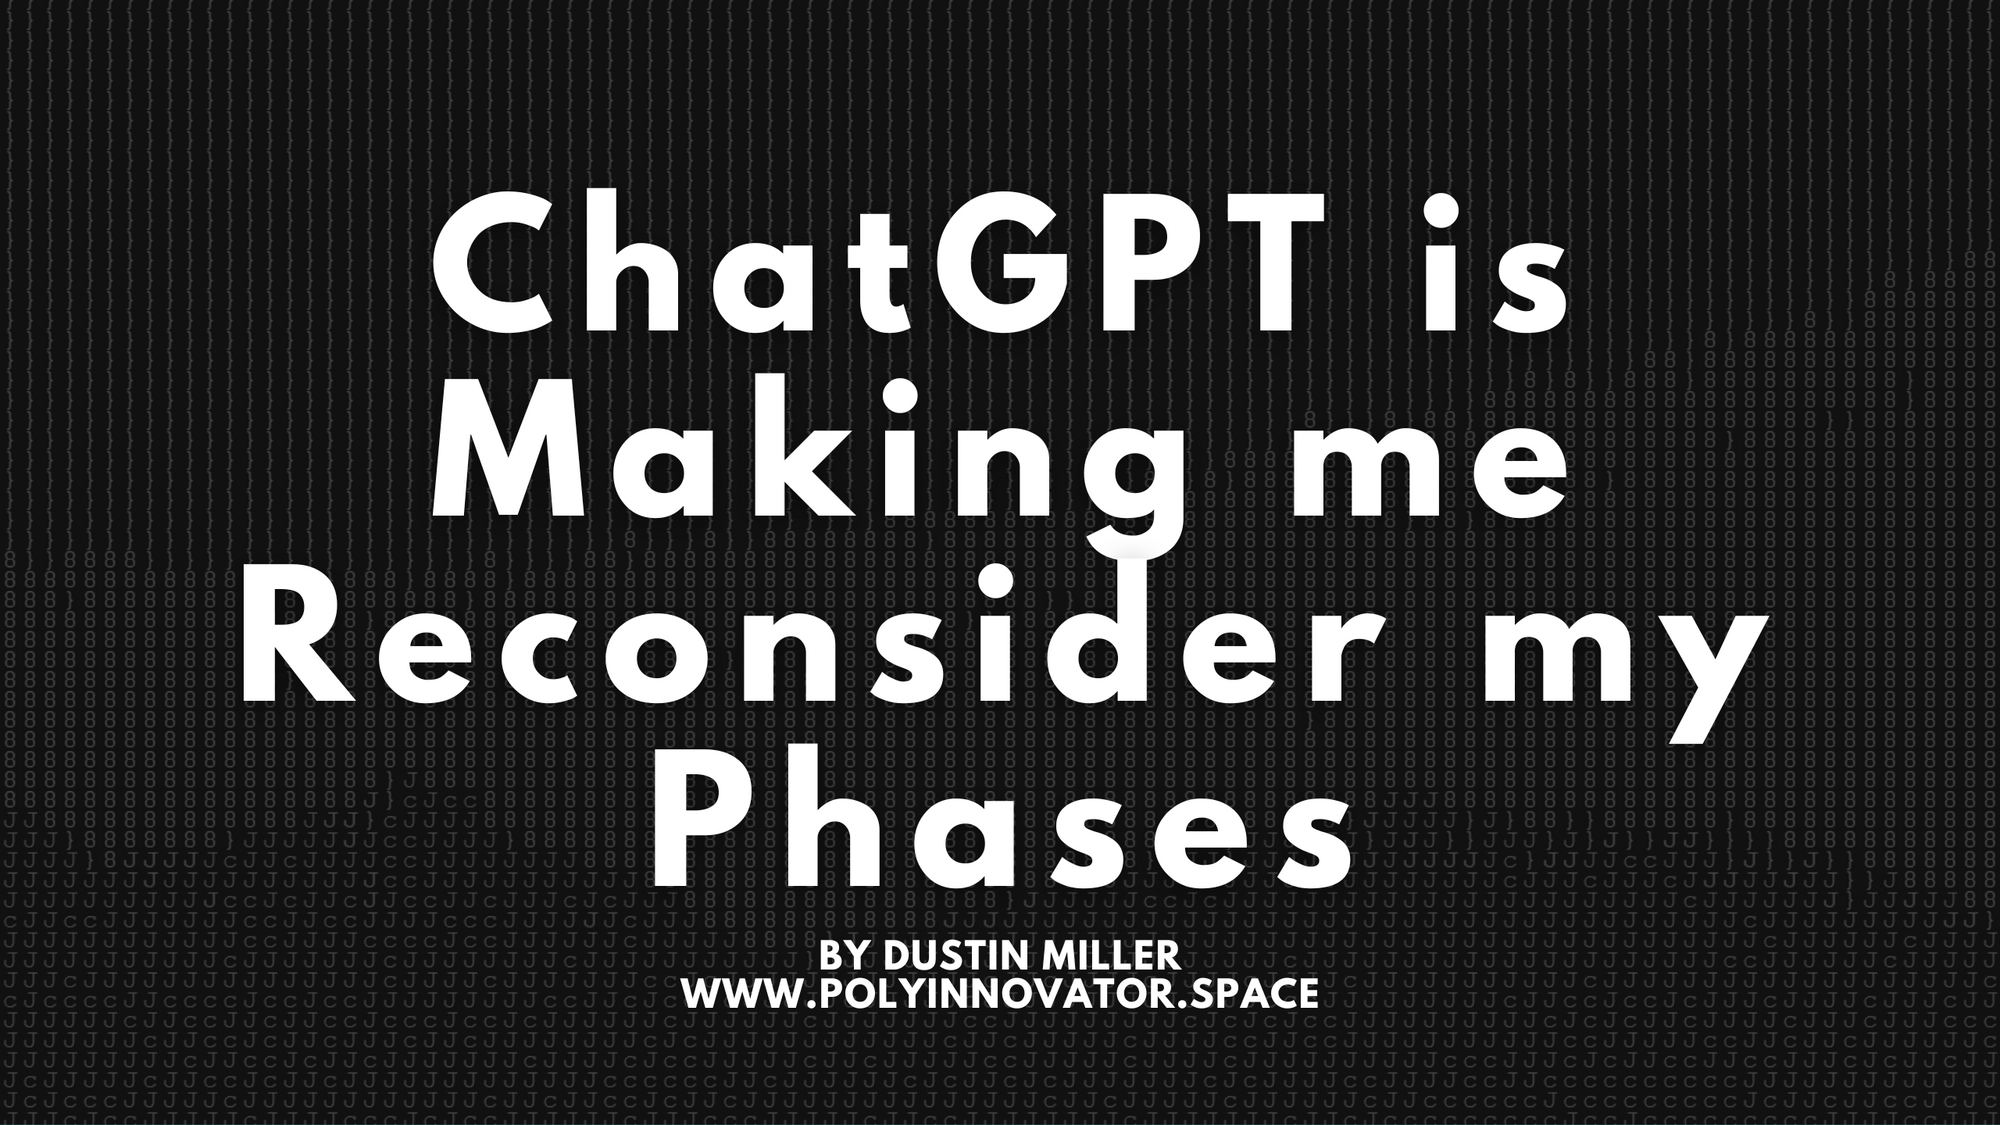 ChatGPT is Making me Reconsider my Phases